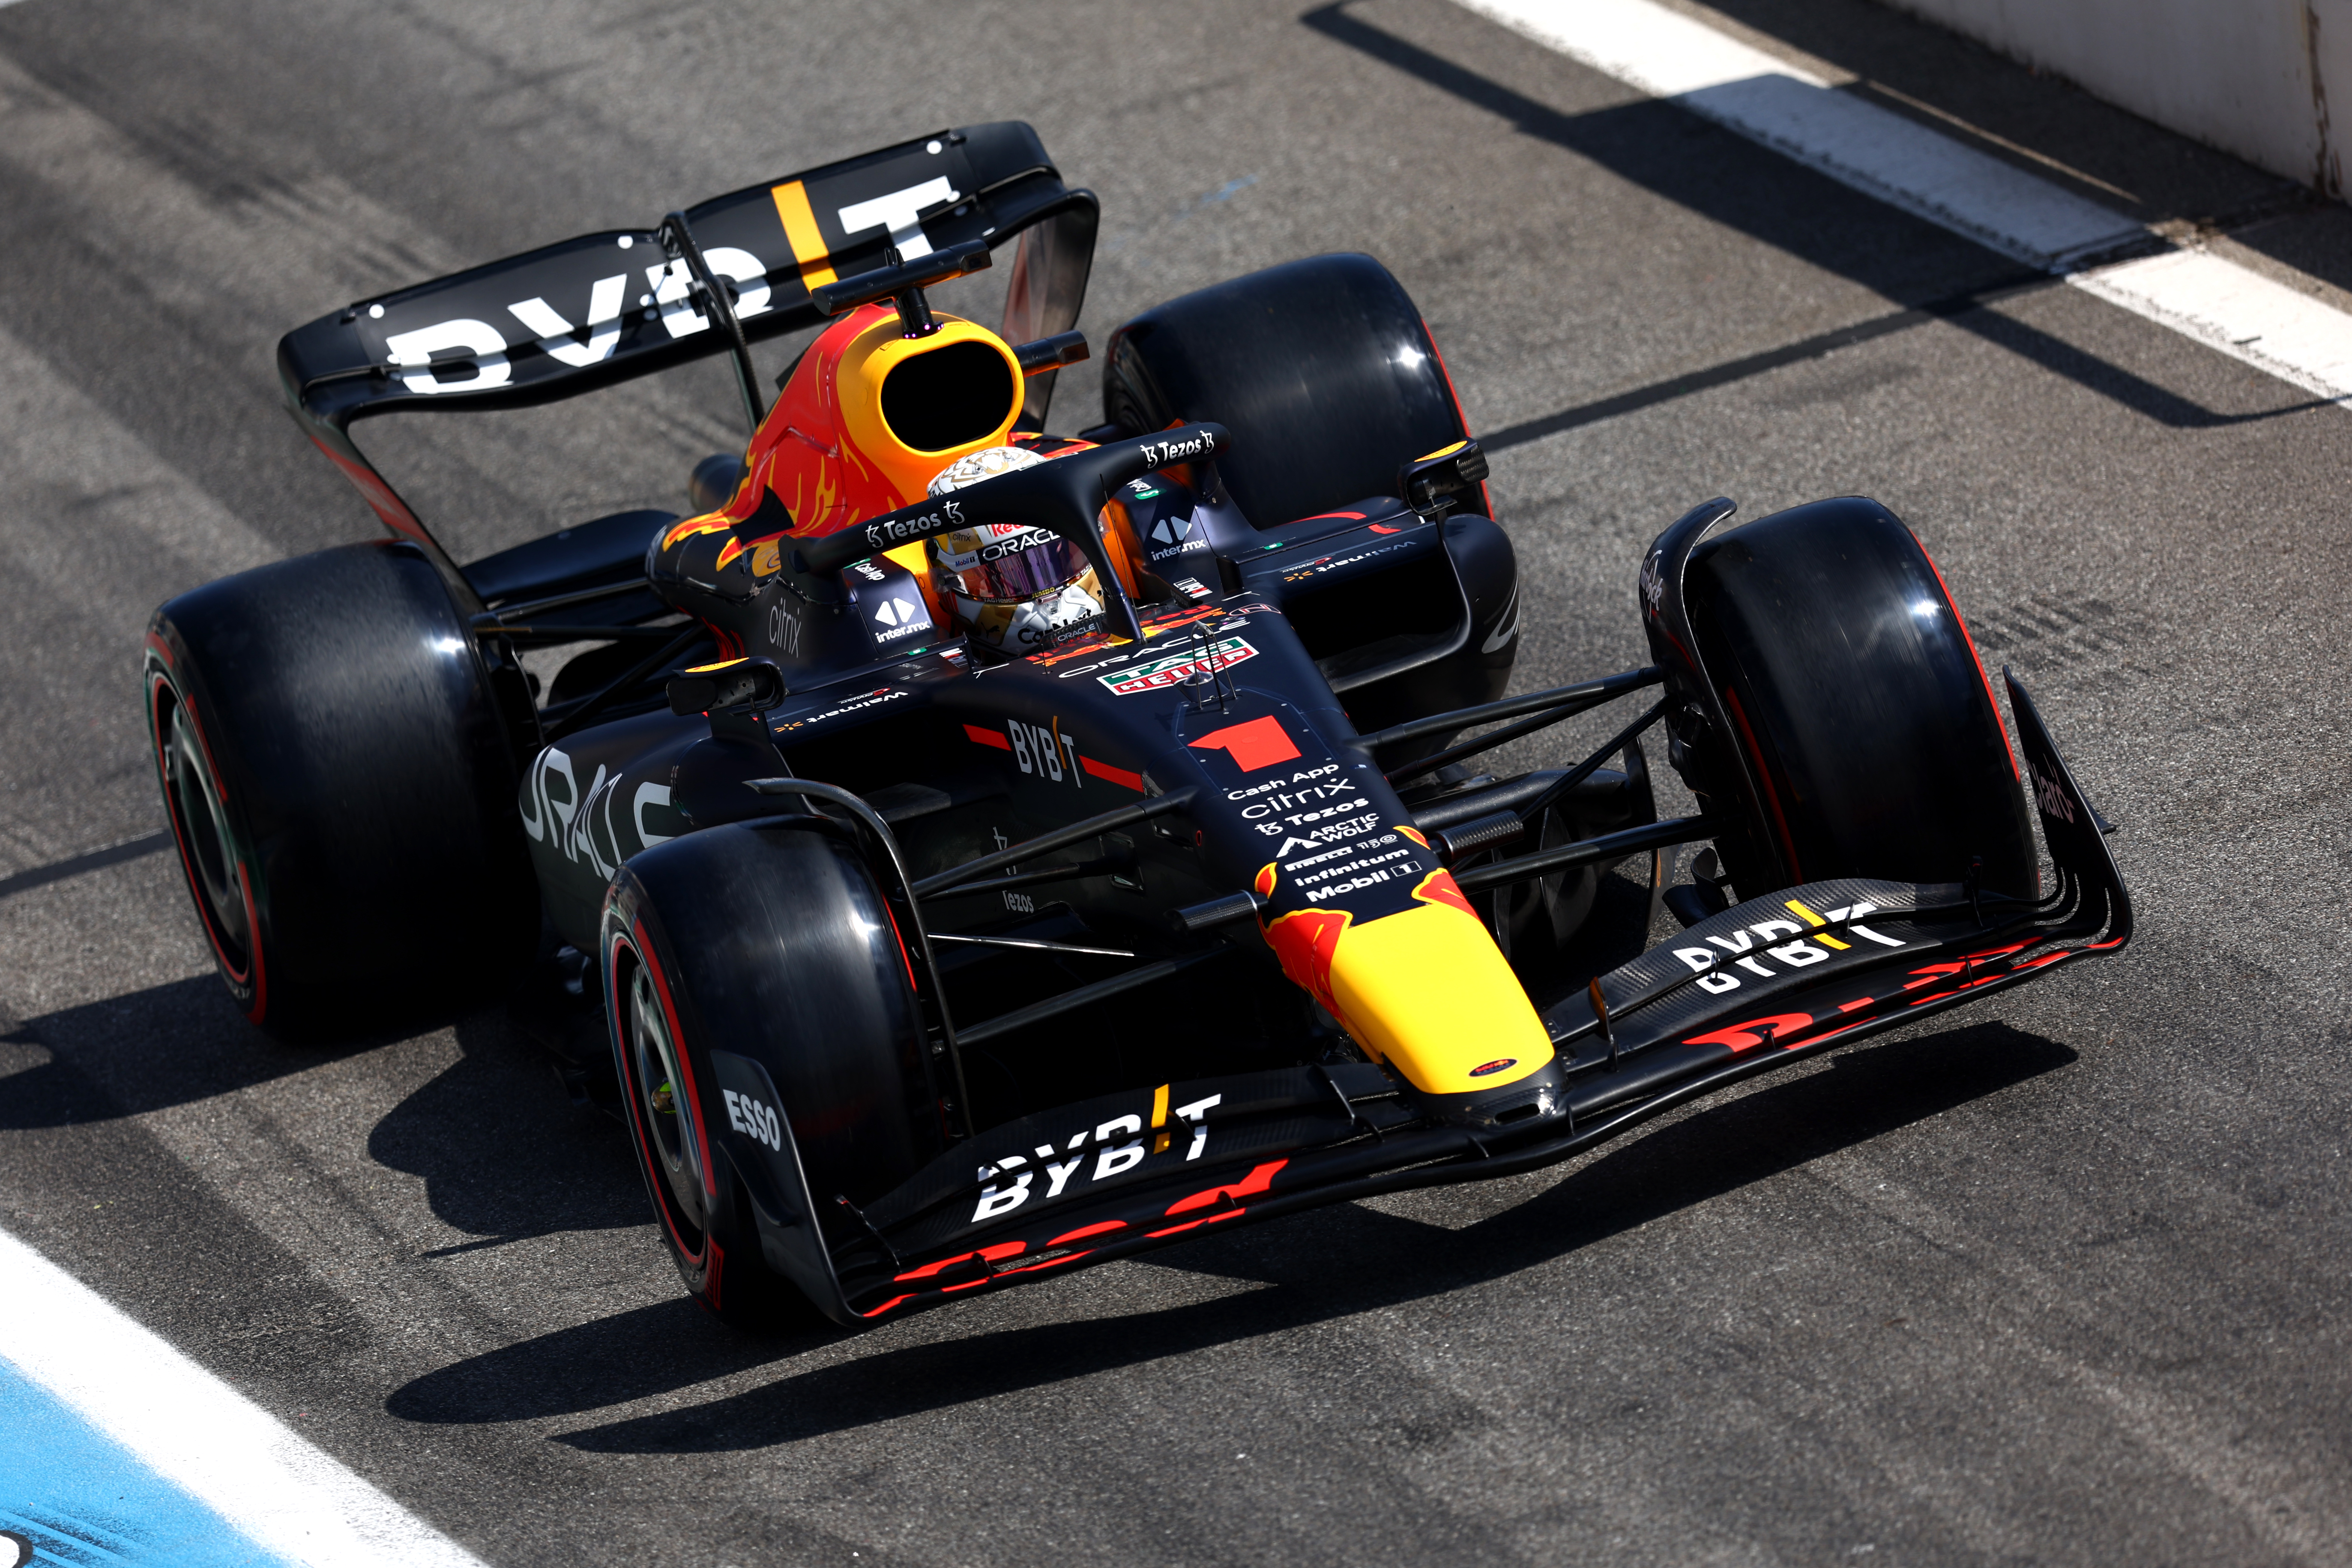 Max Verstappen during the French Grand Prix at the Paul Ricard Circuit. Photo: Clive Rose